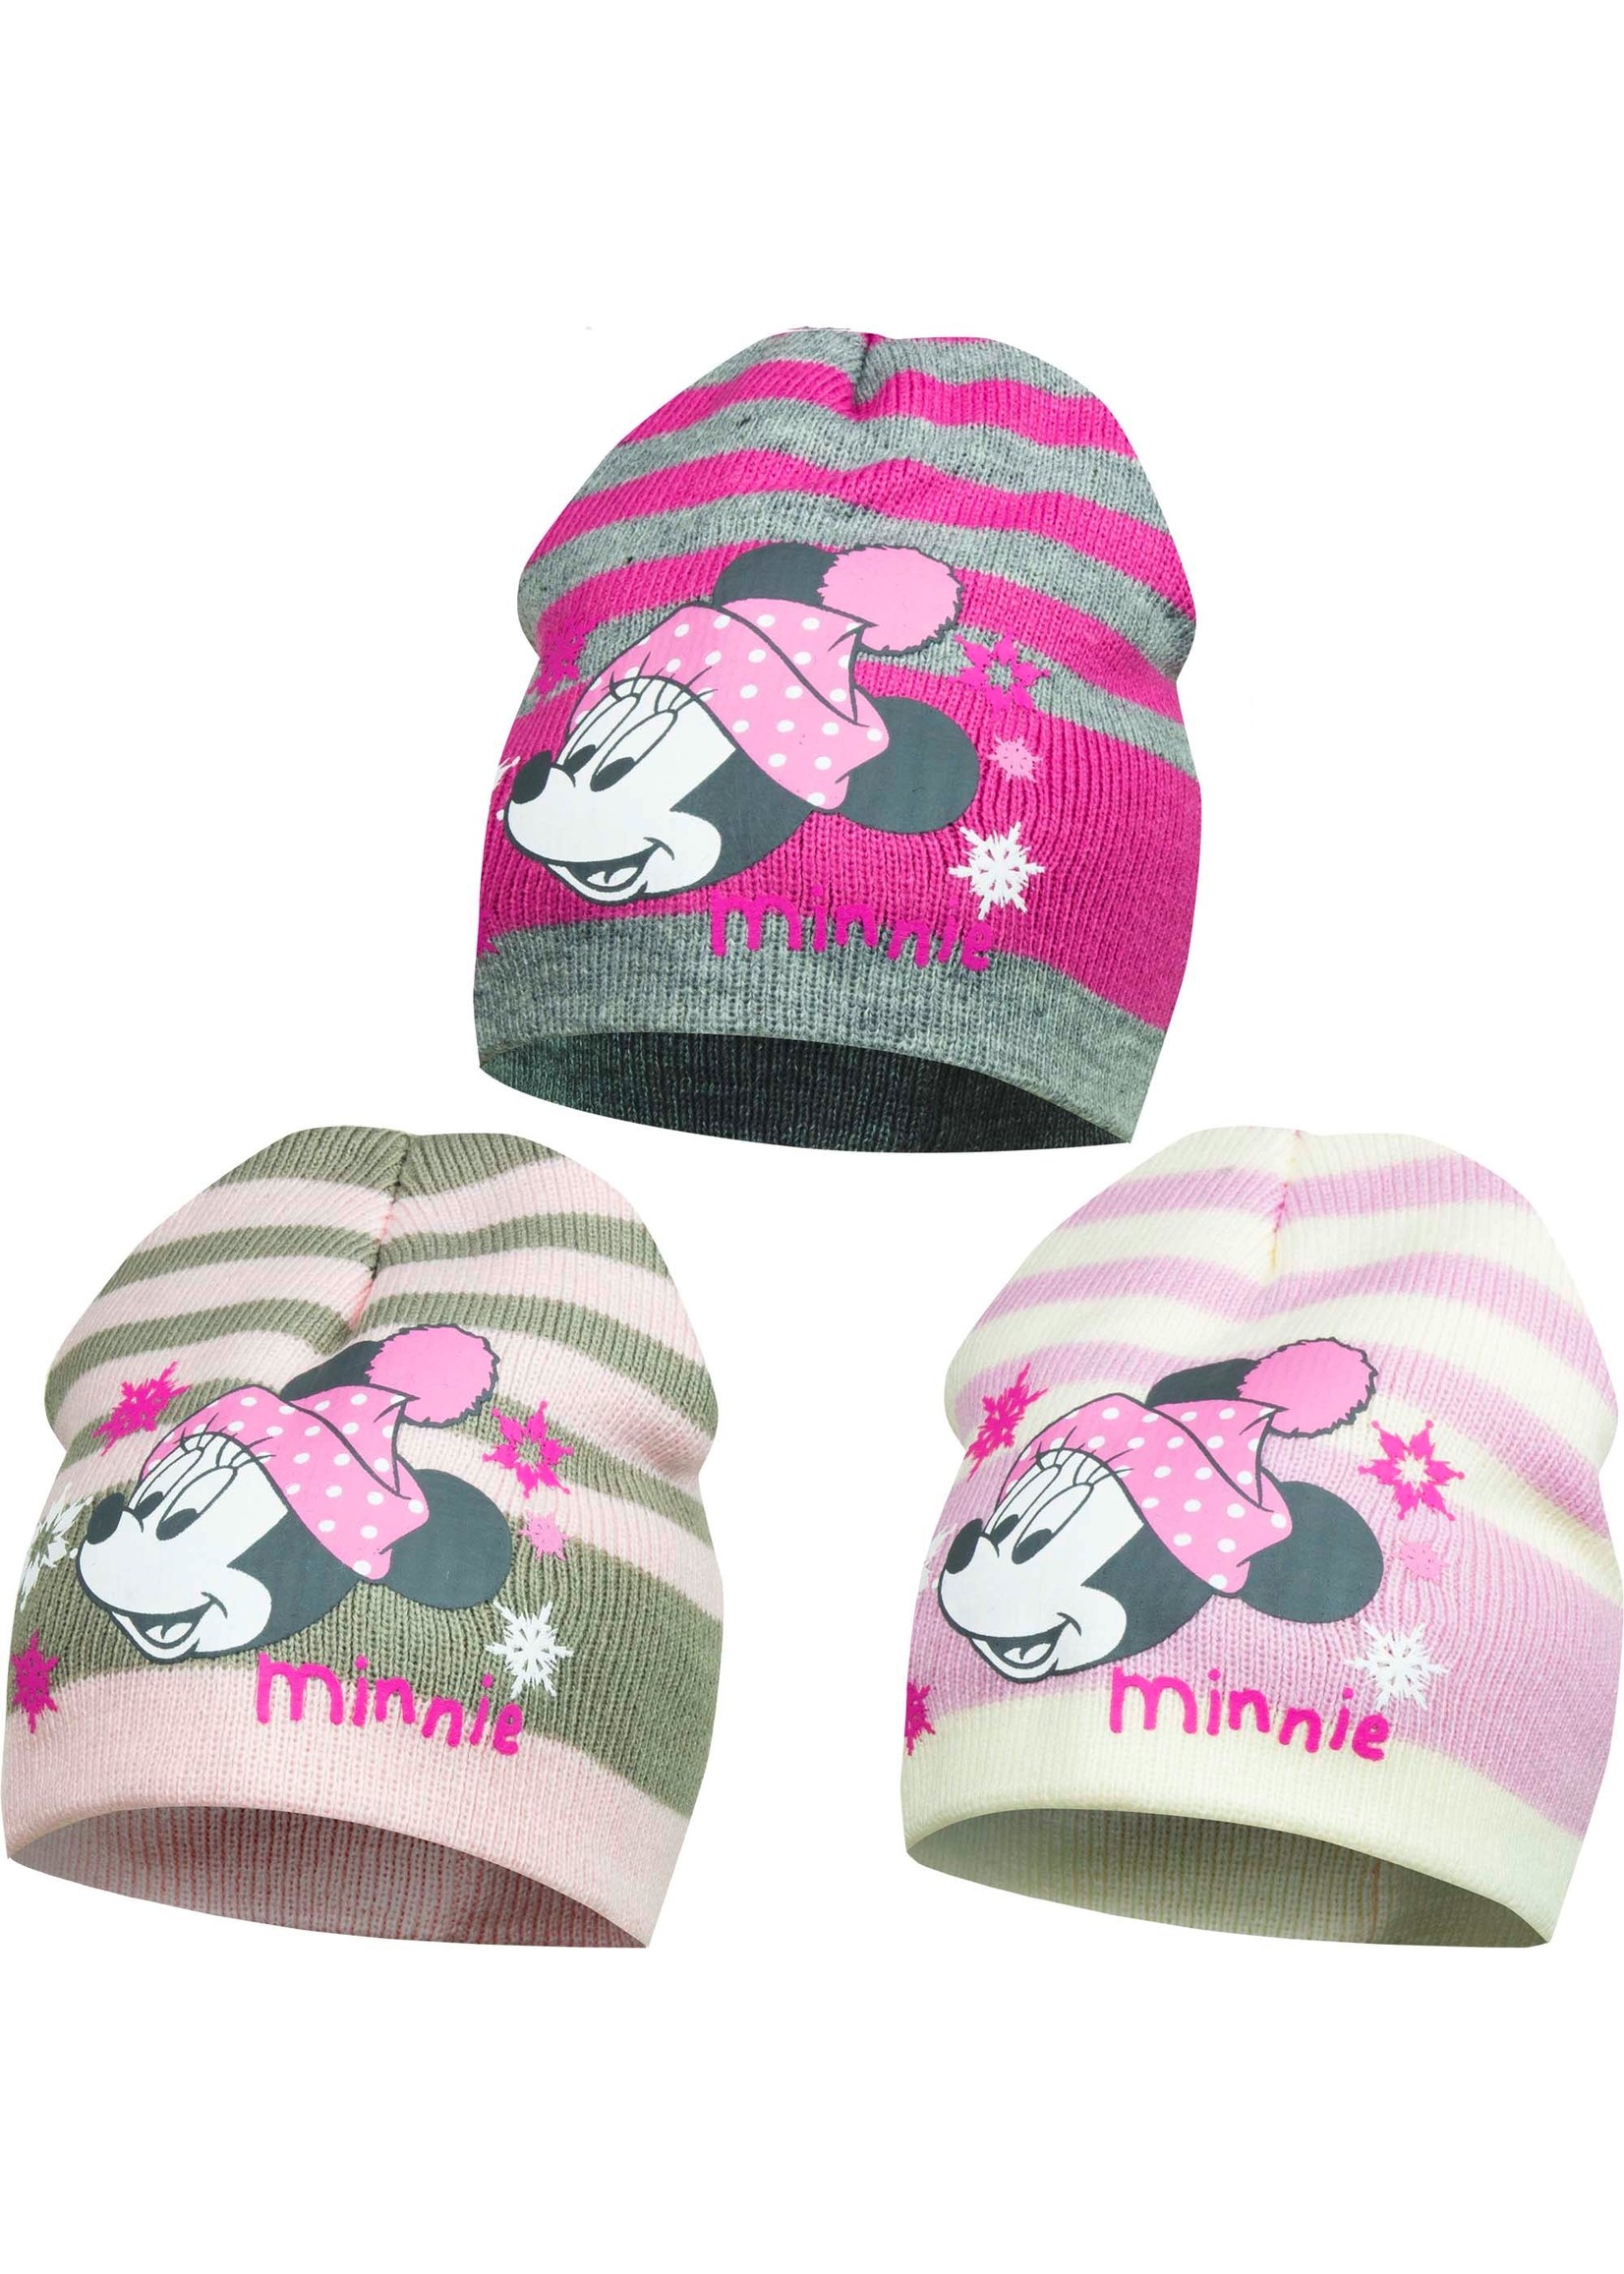 Disney baby Minnie Mouse jersey hat from Disney baby green